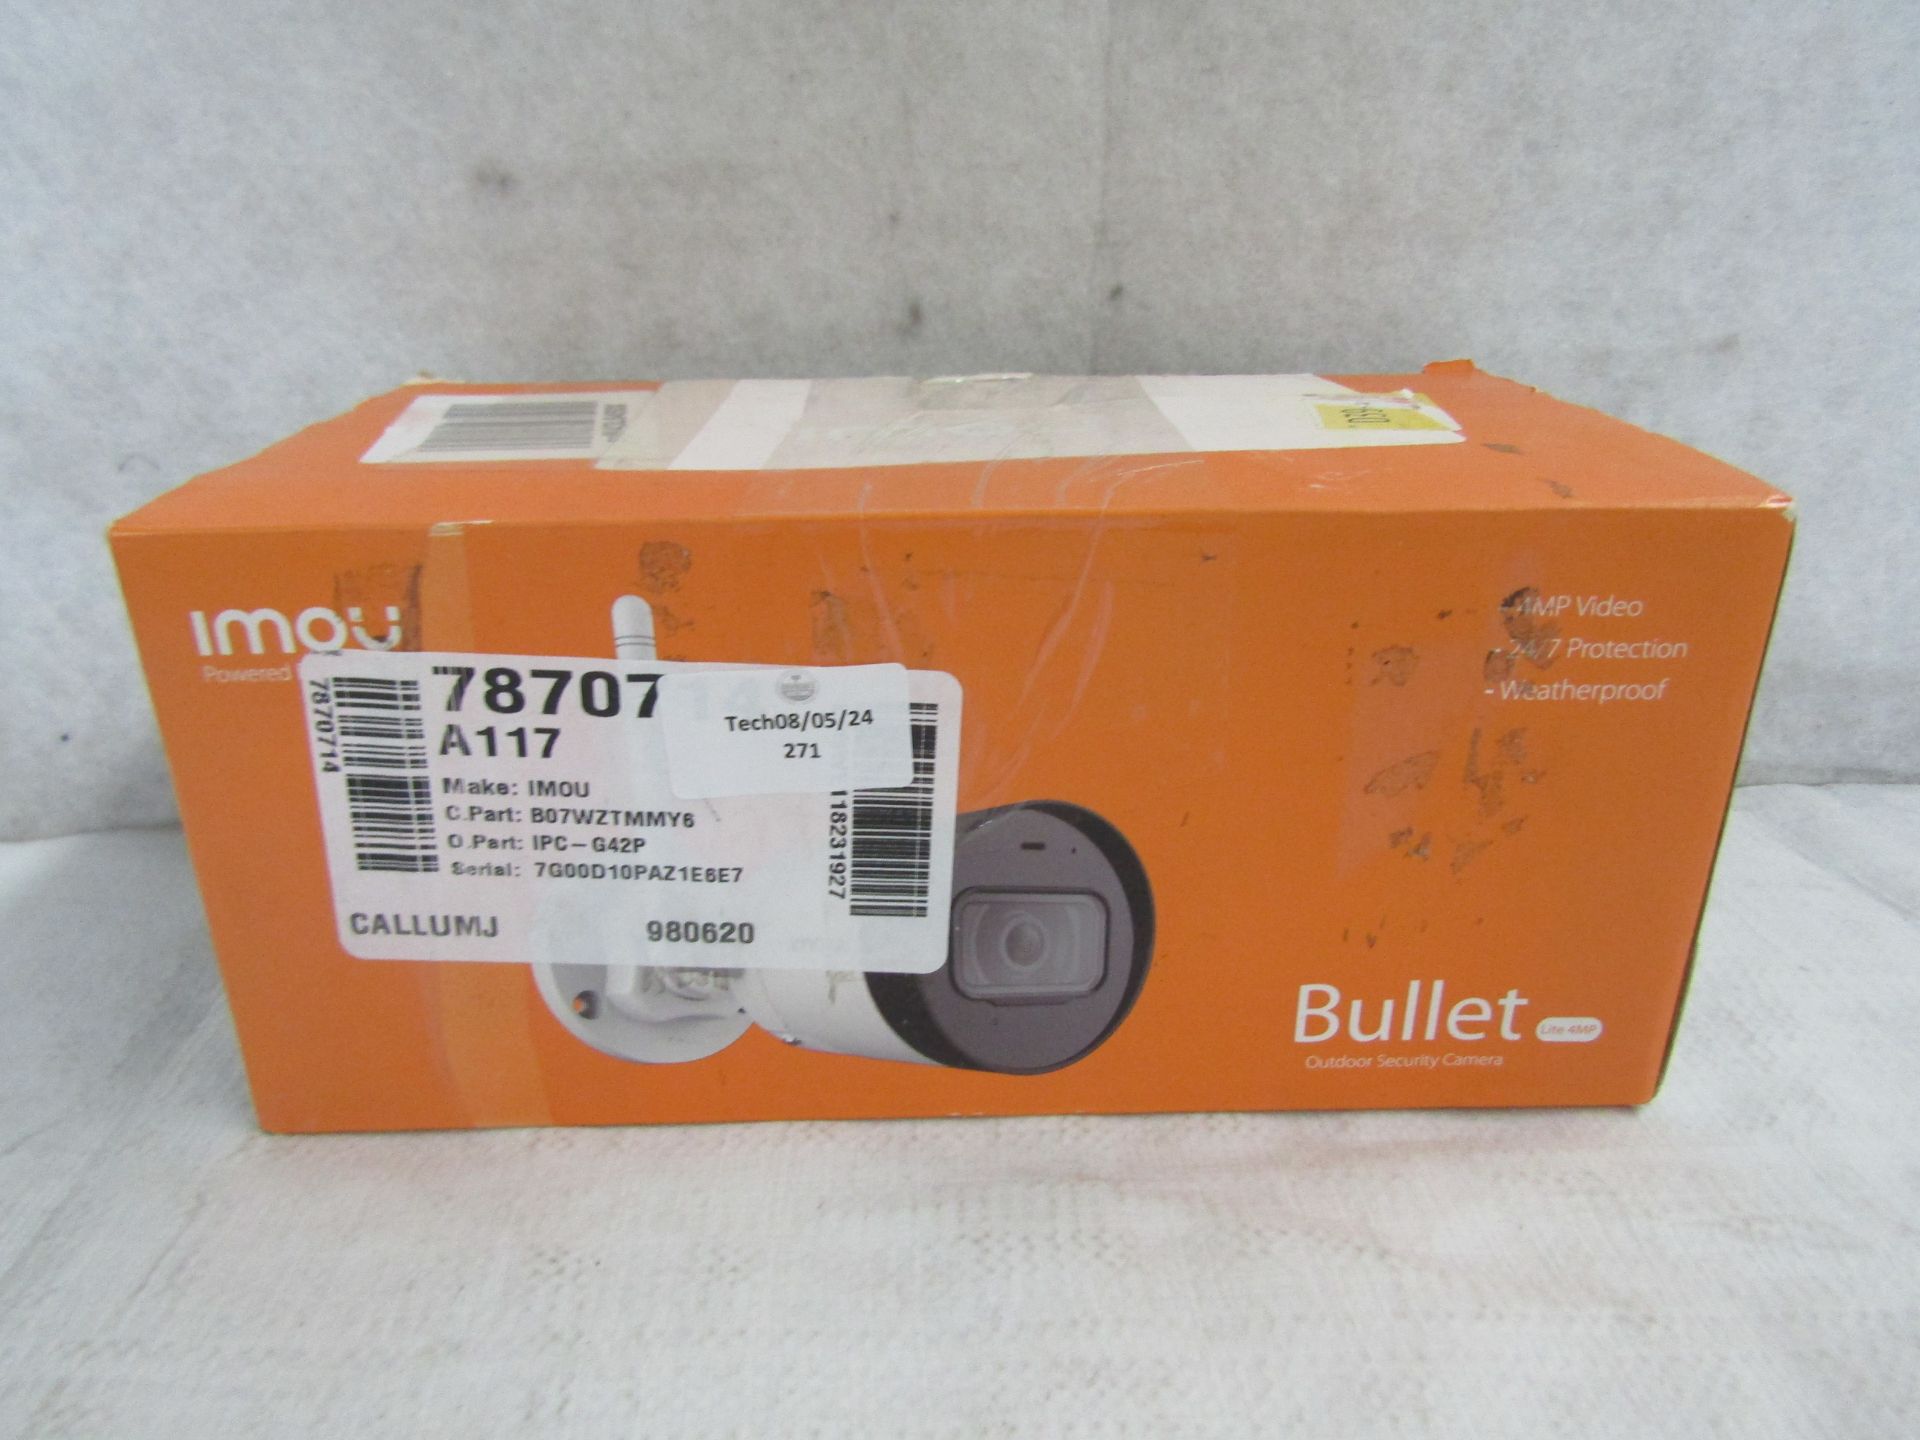 Imou Bullet Outdoor Security Camera, Unchecked & Boxed. RRP £29